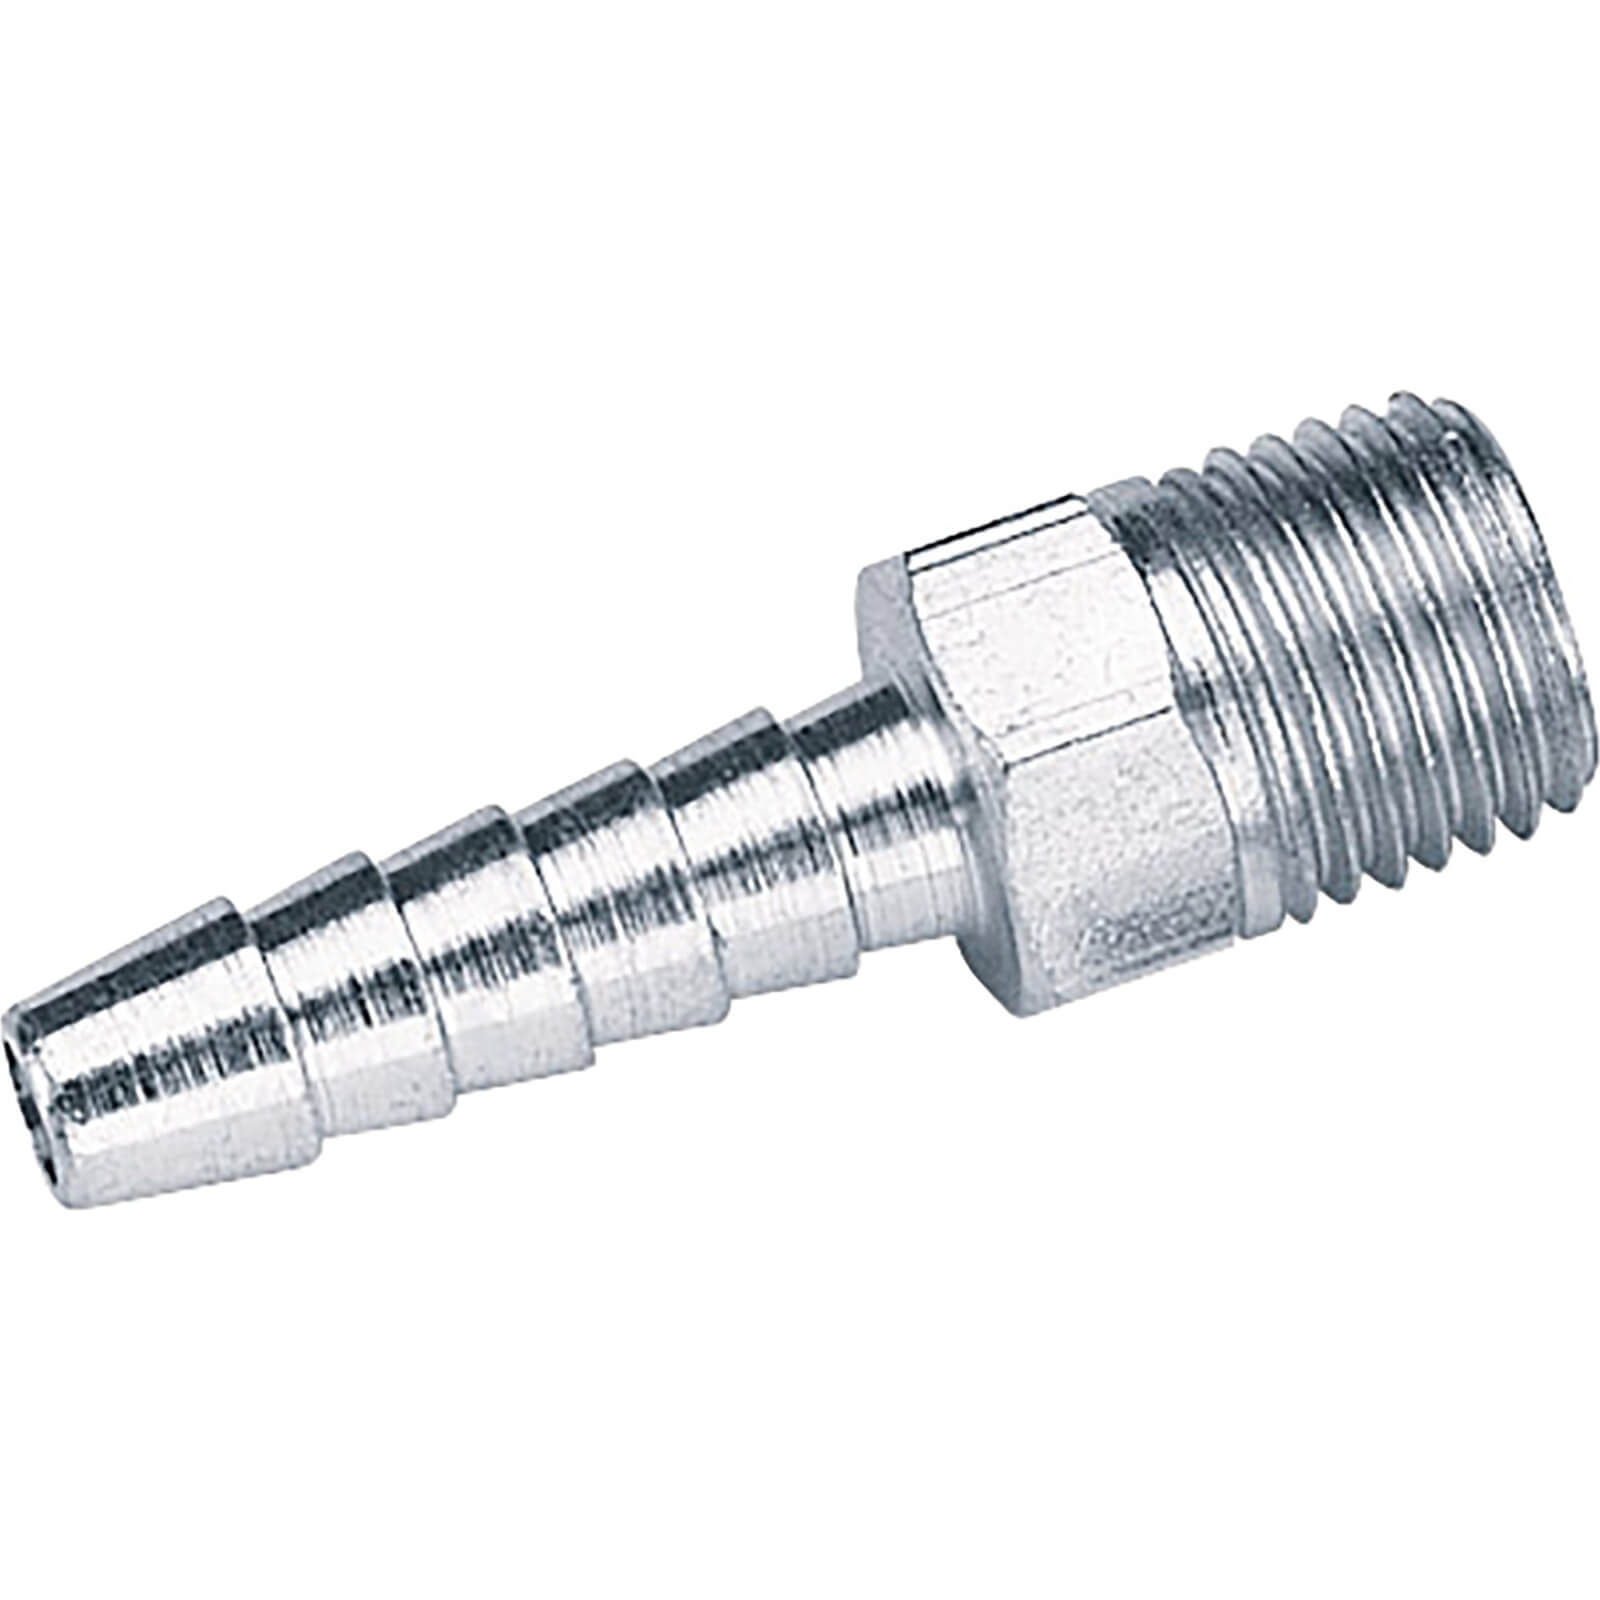 Photos - Equipment Accessory Draper PCL Tailpiece Air Line Fitting BSPT Male Thread 1/4" BSP 1/4" Pack 